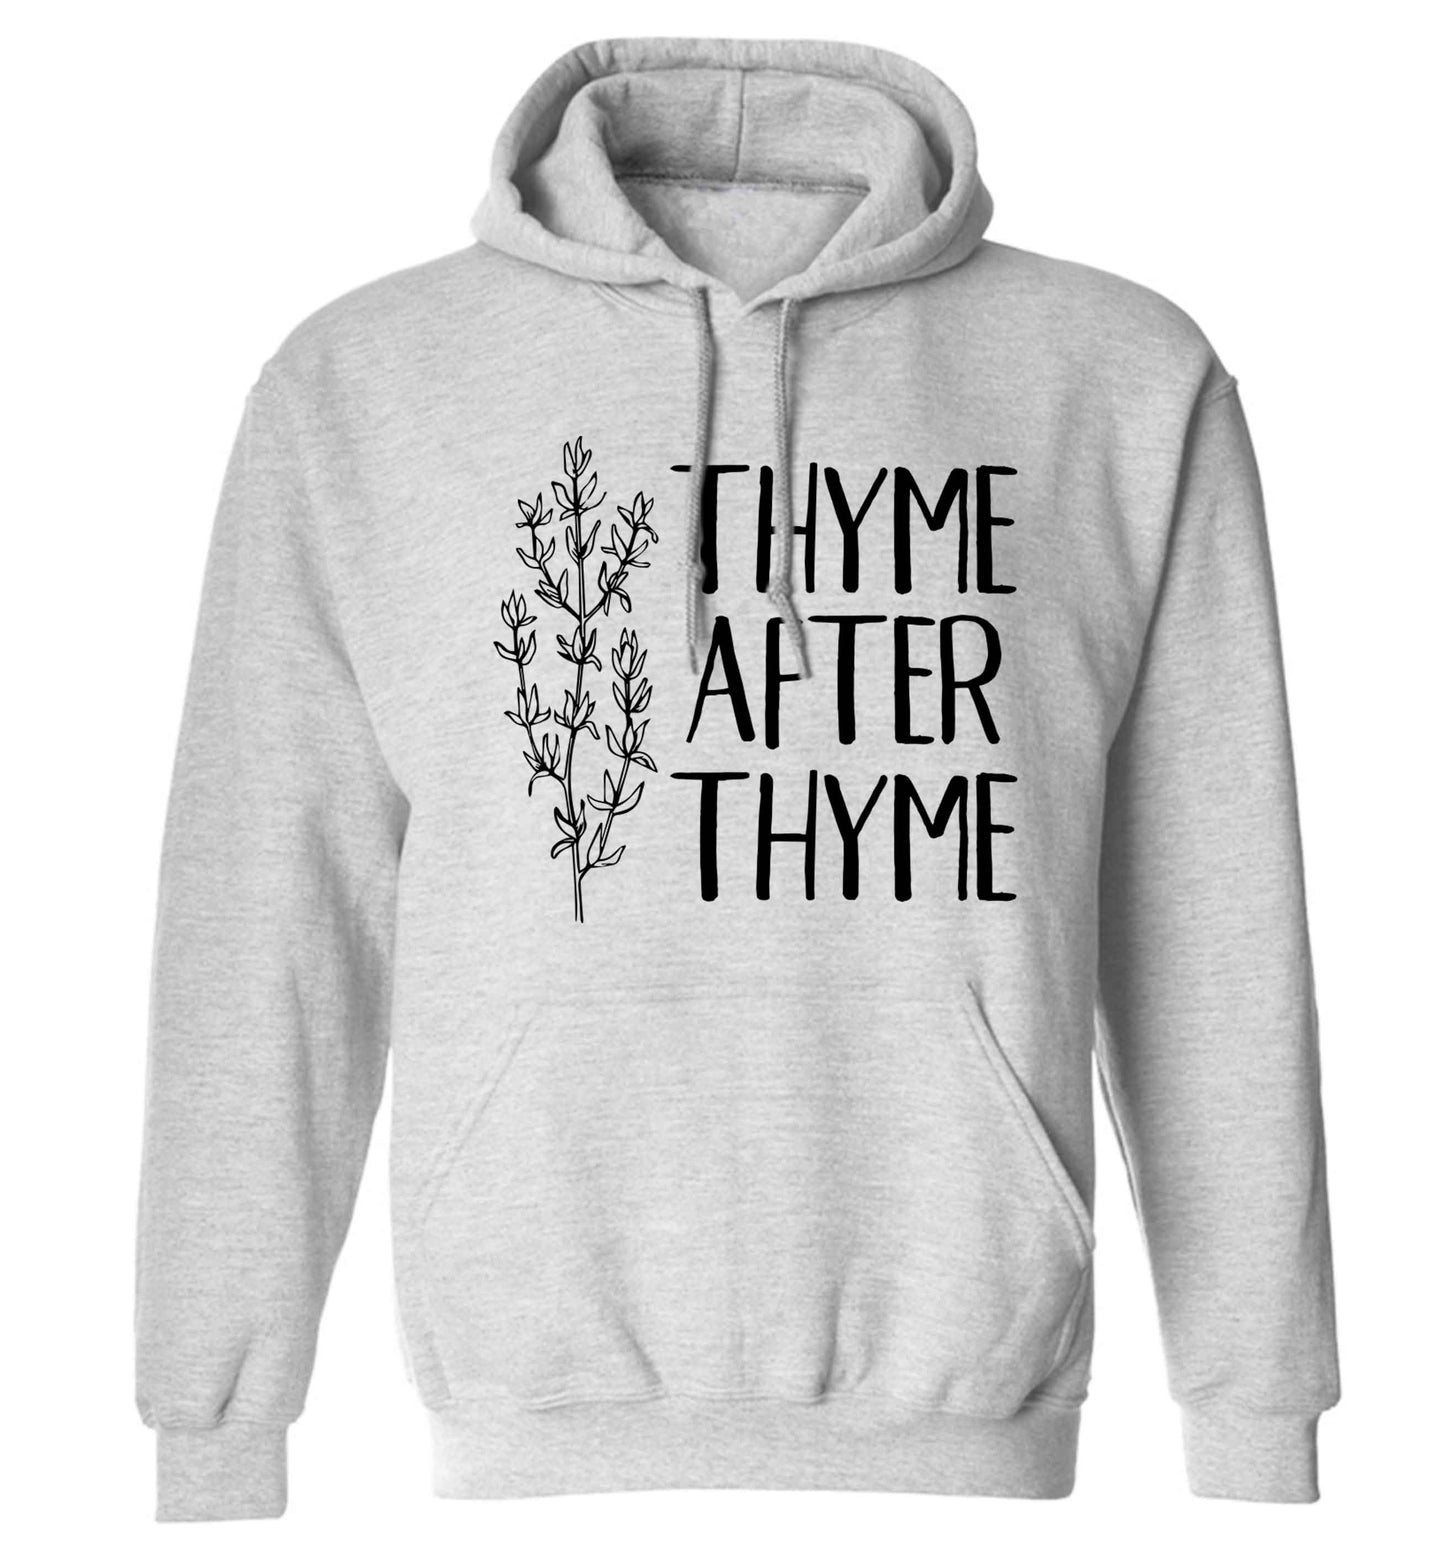 Thyme after thyme adults unisex grey hoodie 2XL